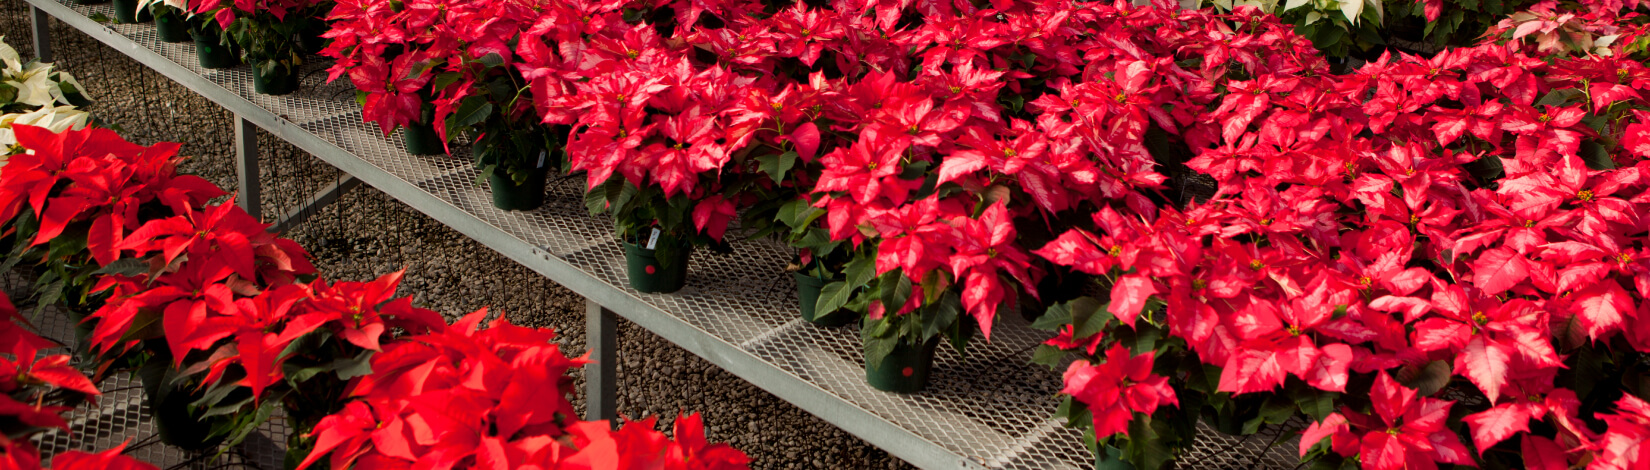 New poinsettia varities and the Environmental Horticulture Club's Annual Poinsettia sale